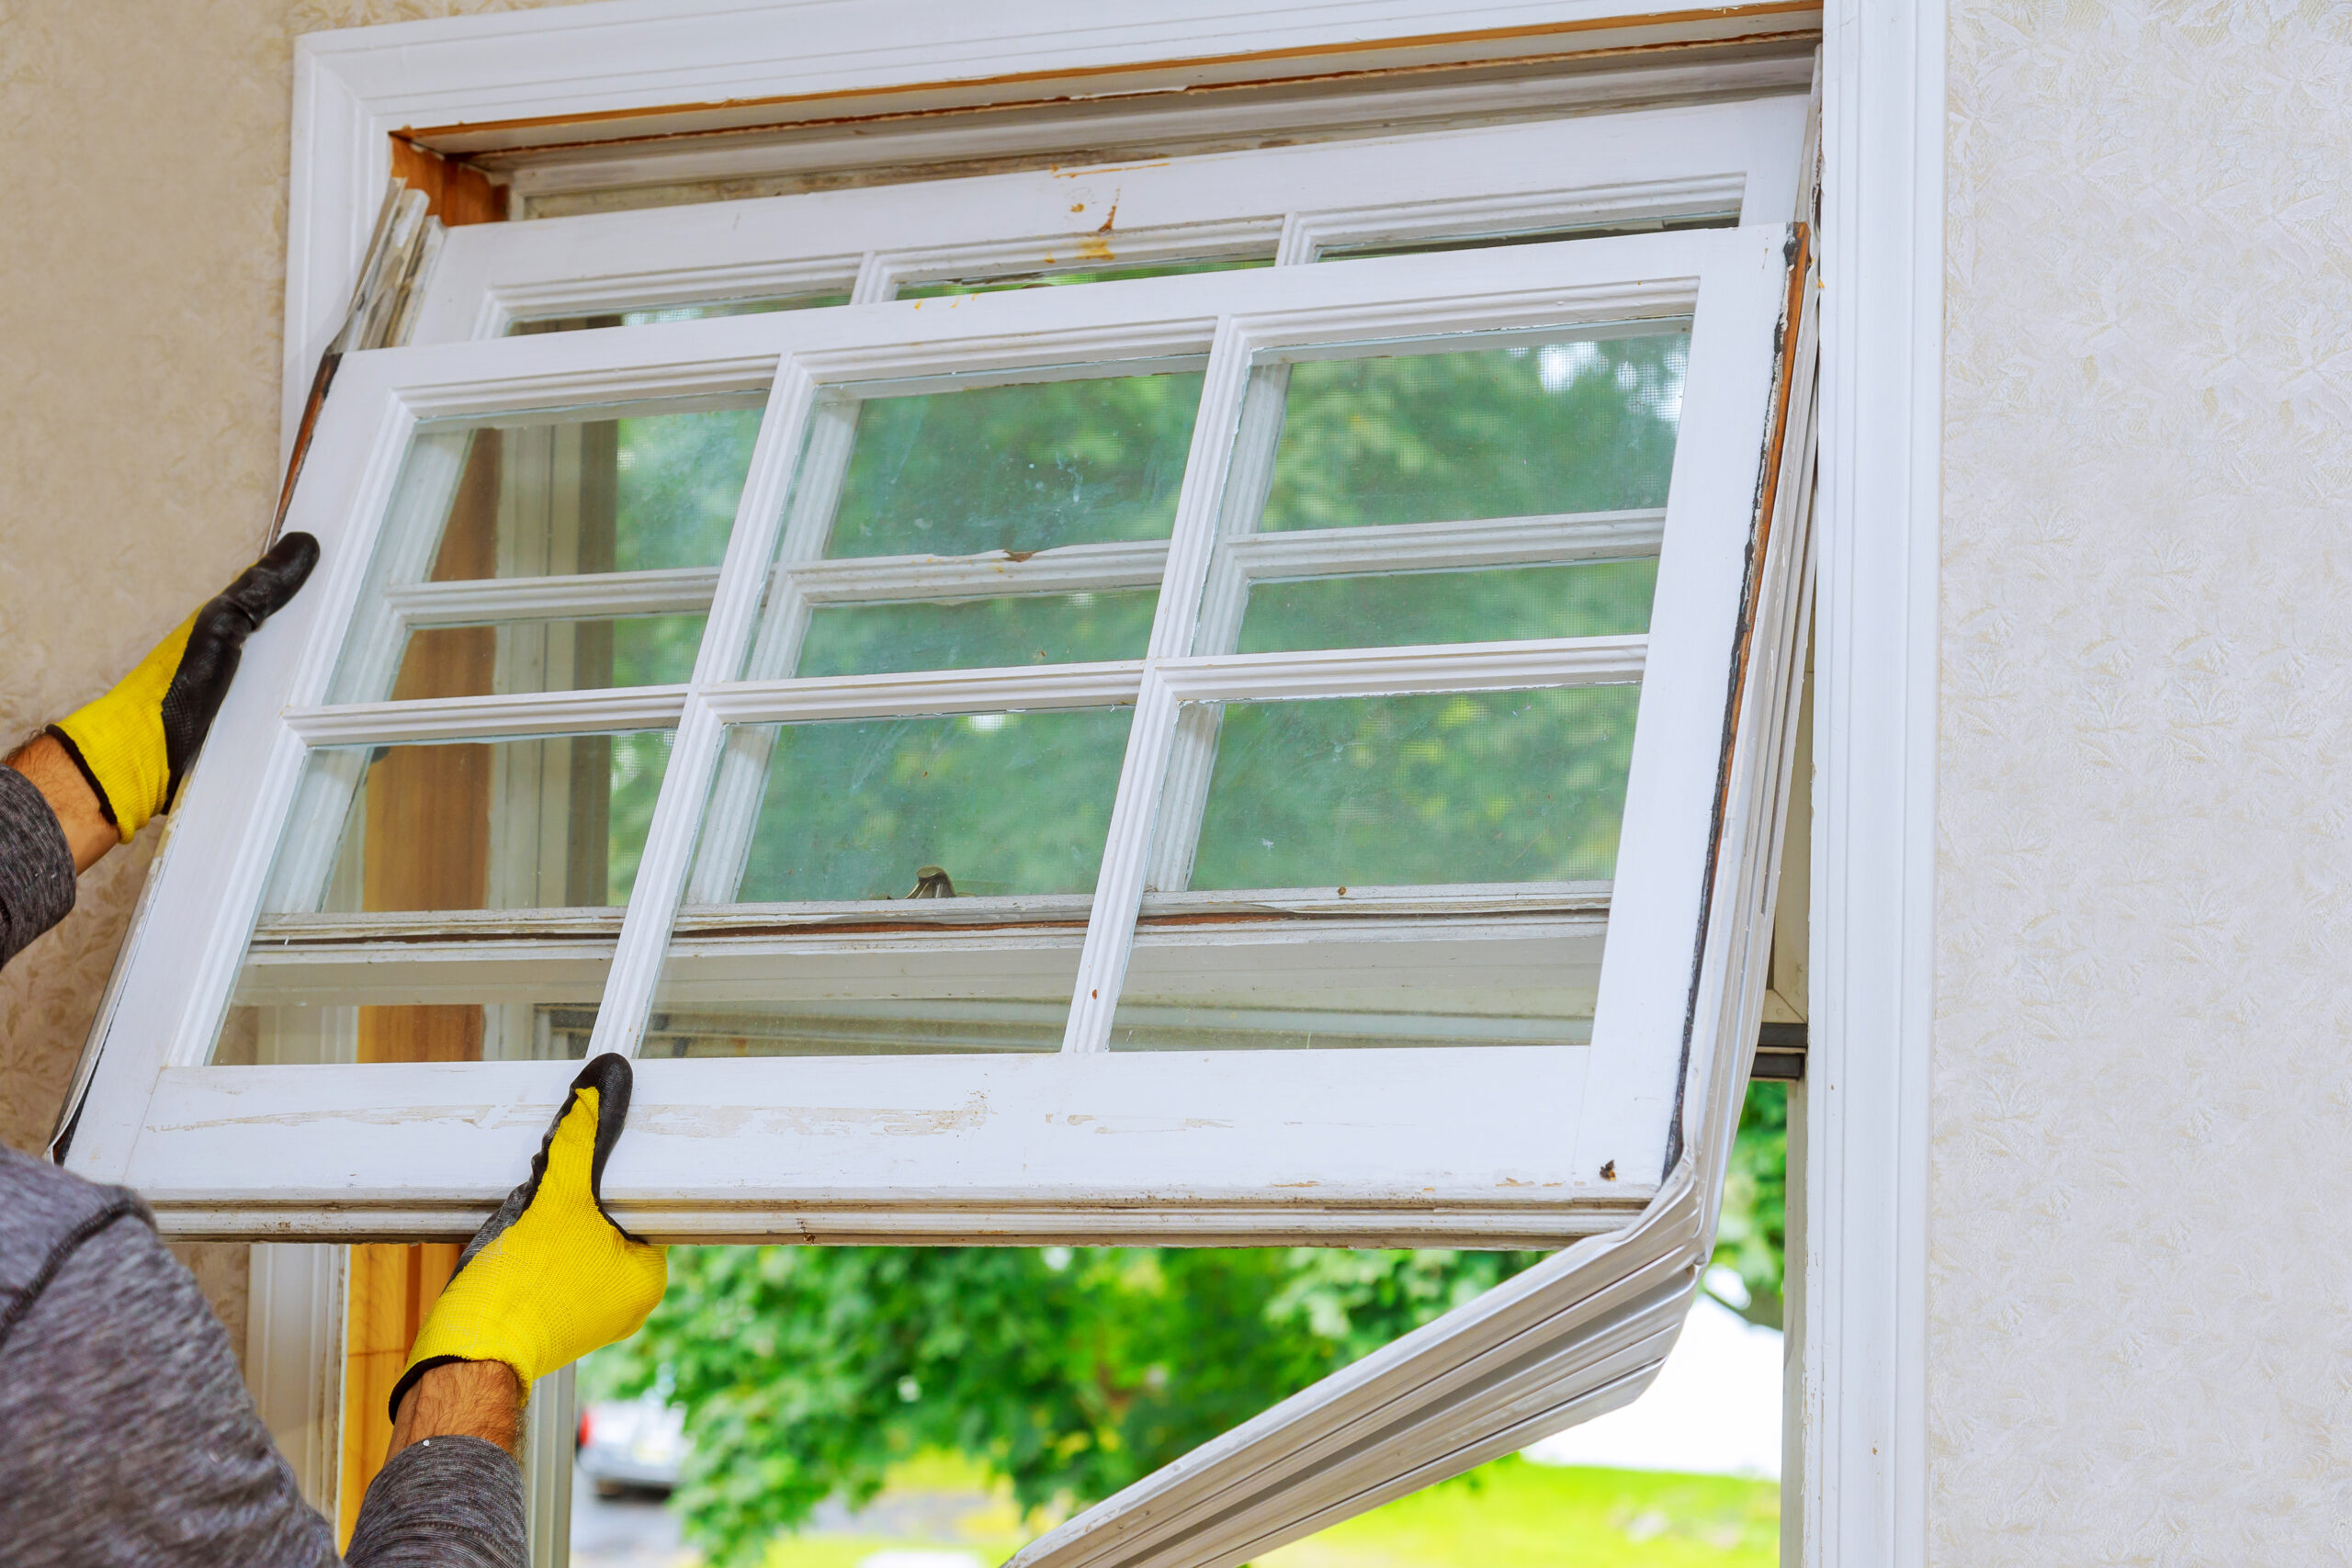 7 SIGNS THAT TELL YOU WHEN TO BUY NEW WINDOWS